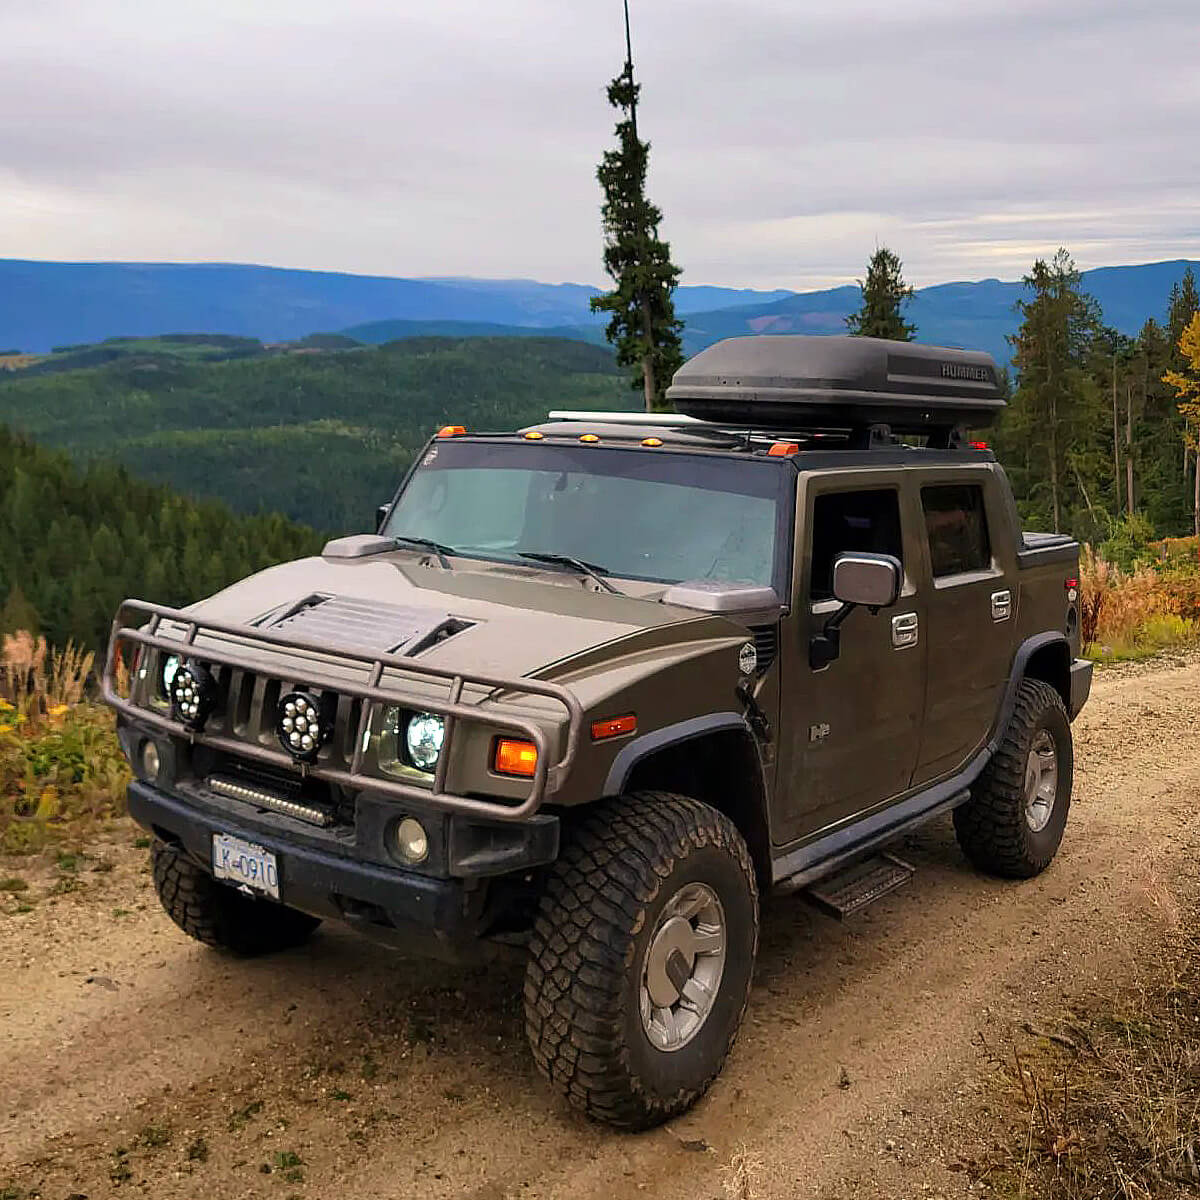 The Unexpected Off-Road - Hummer H2 SUT With a Lift & 37 Inch Tires